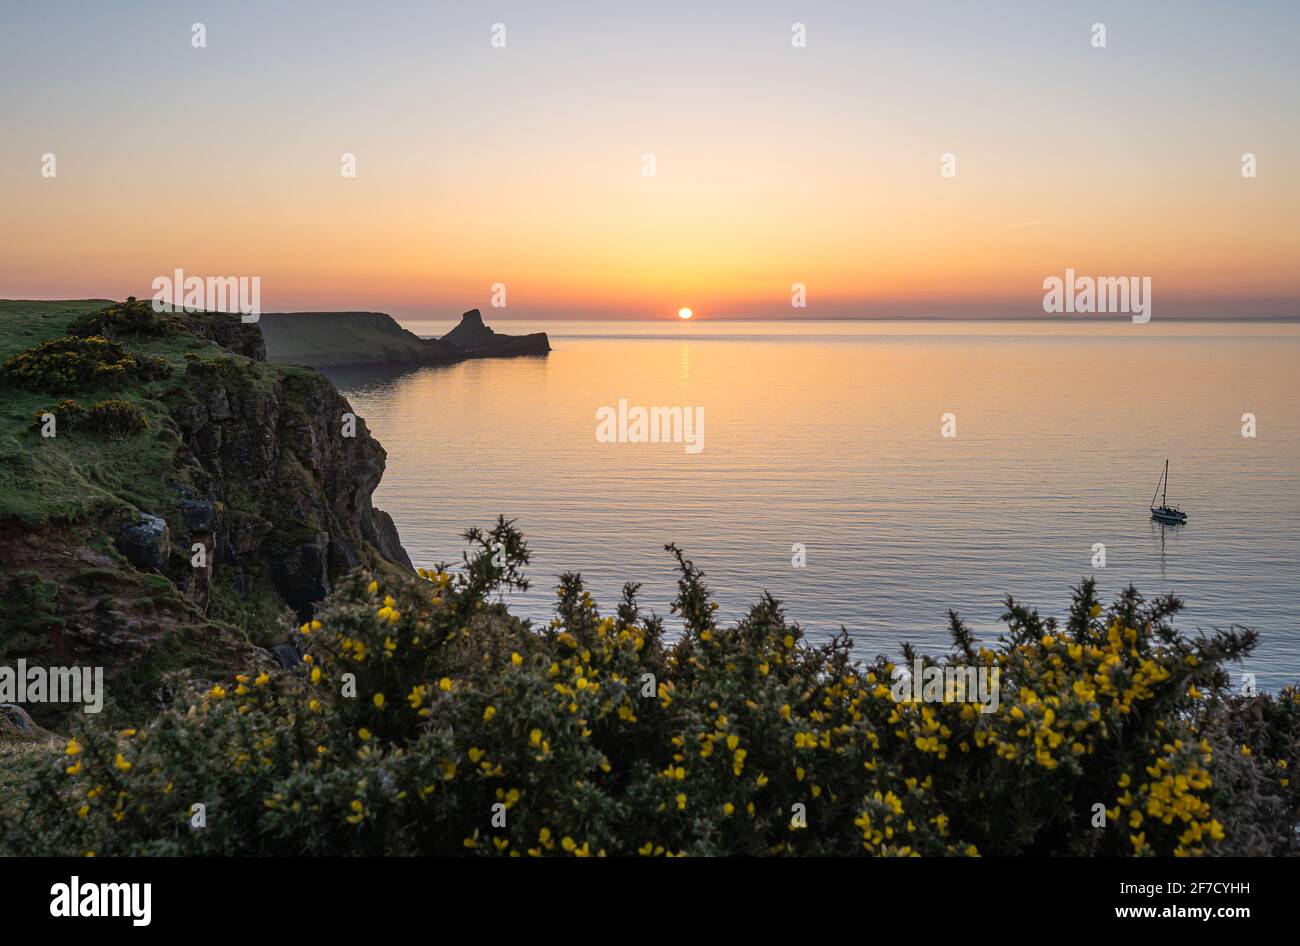 Worm's head Rhossili Bay at sunset and a single boat, Gower peninsula, South Wales, UK Stock Photo